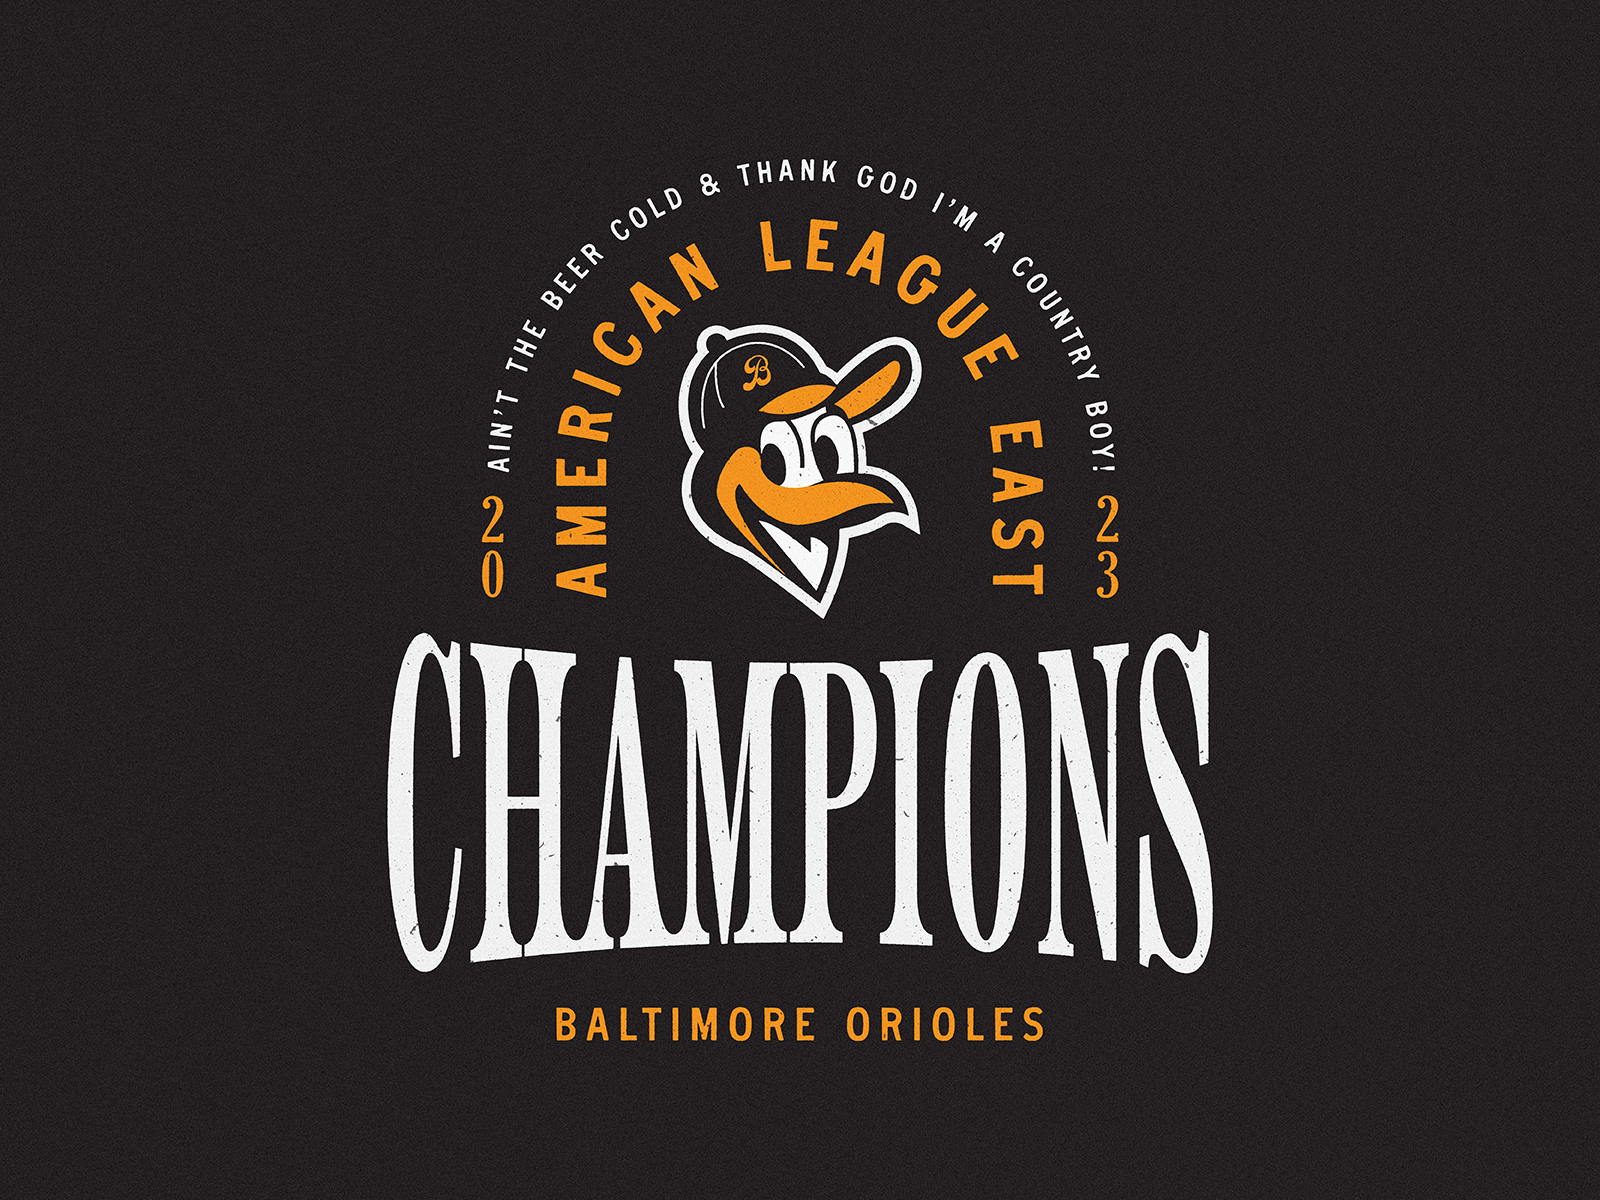 American League East Champs. by Forrest Williams ✌︎ on Dribbble